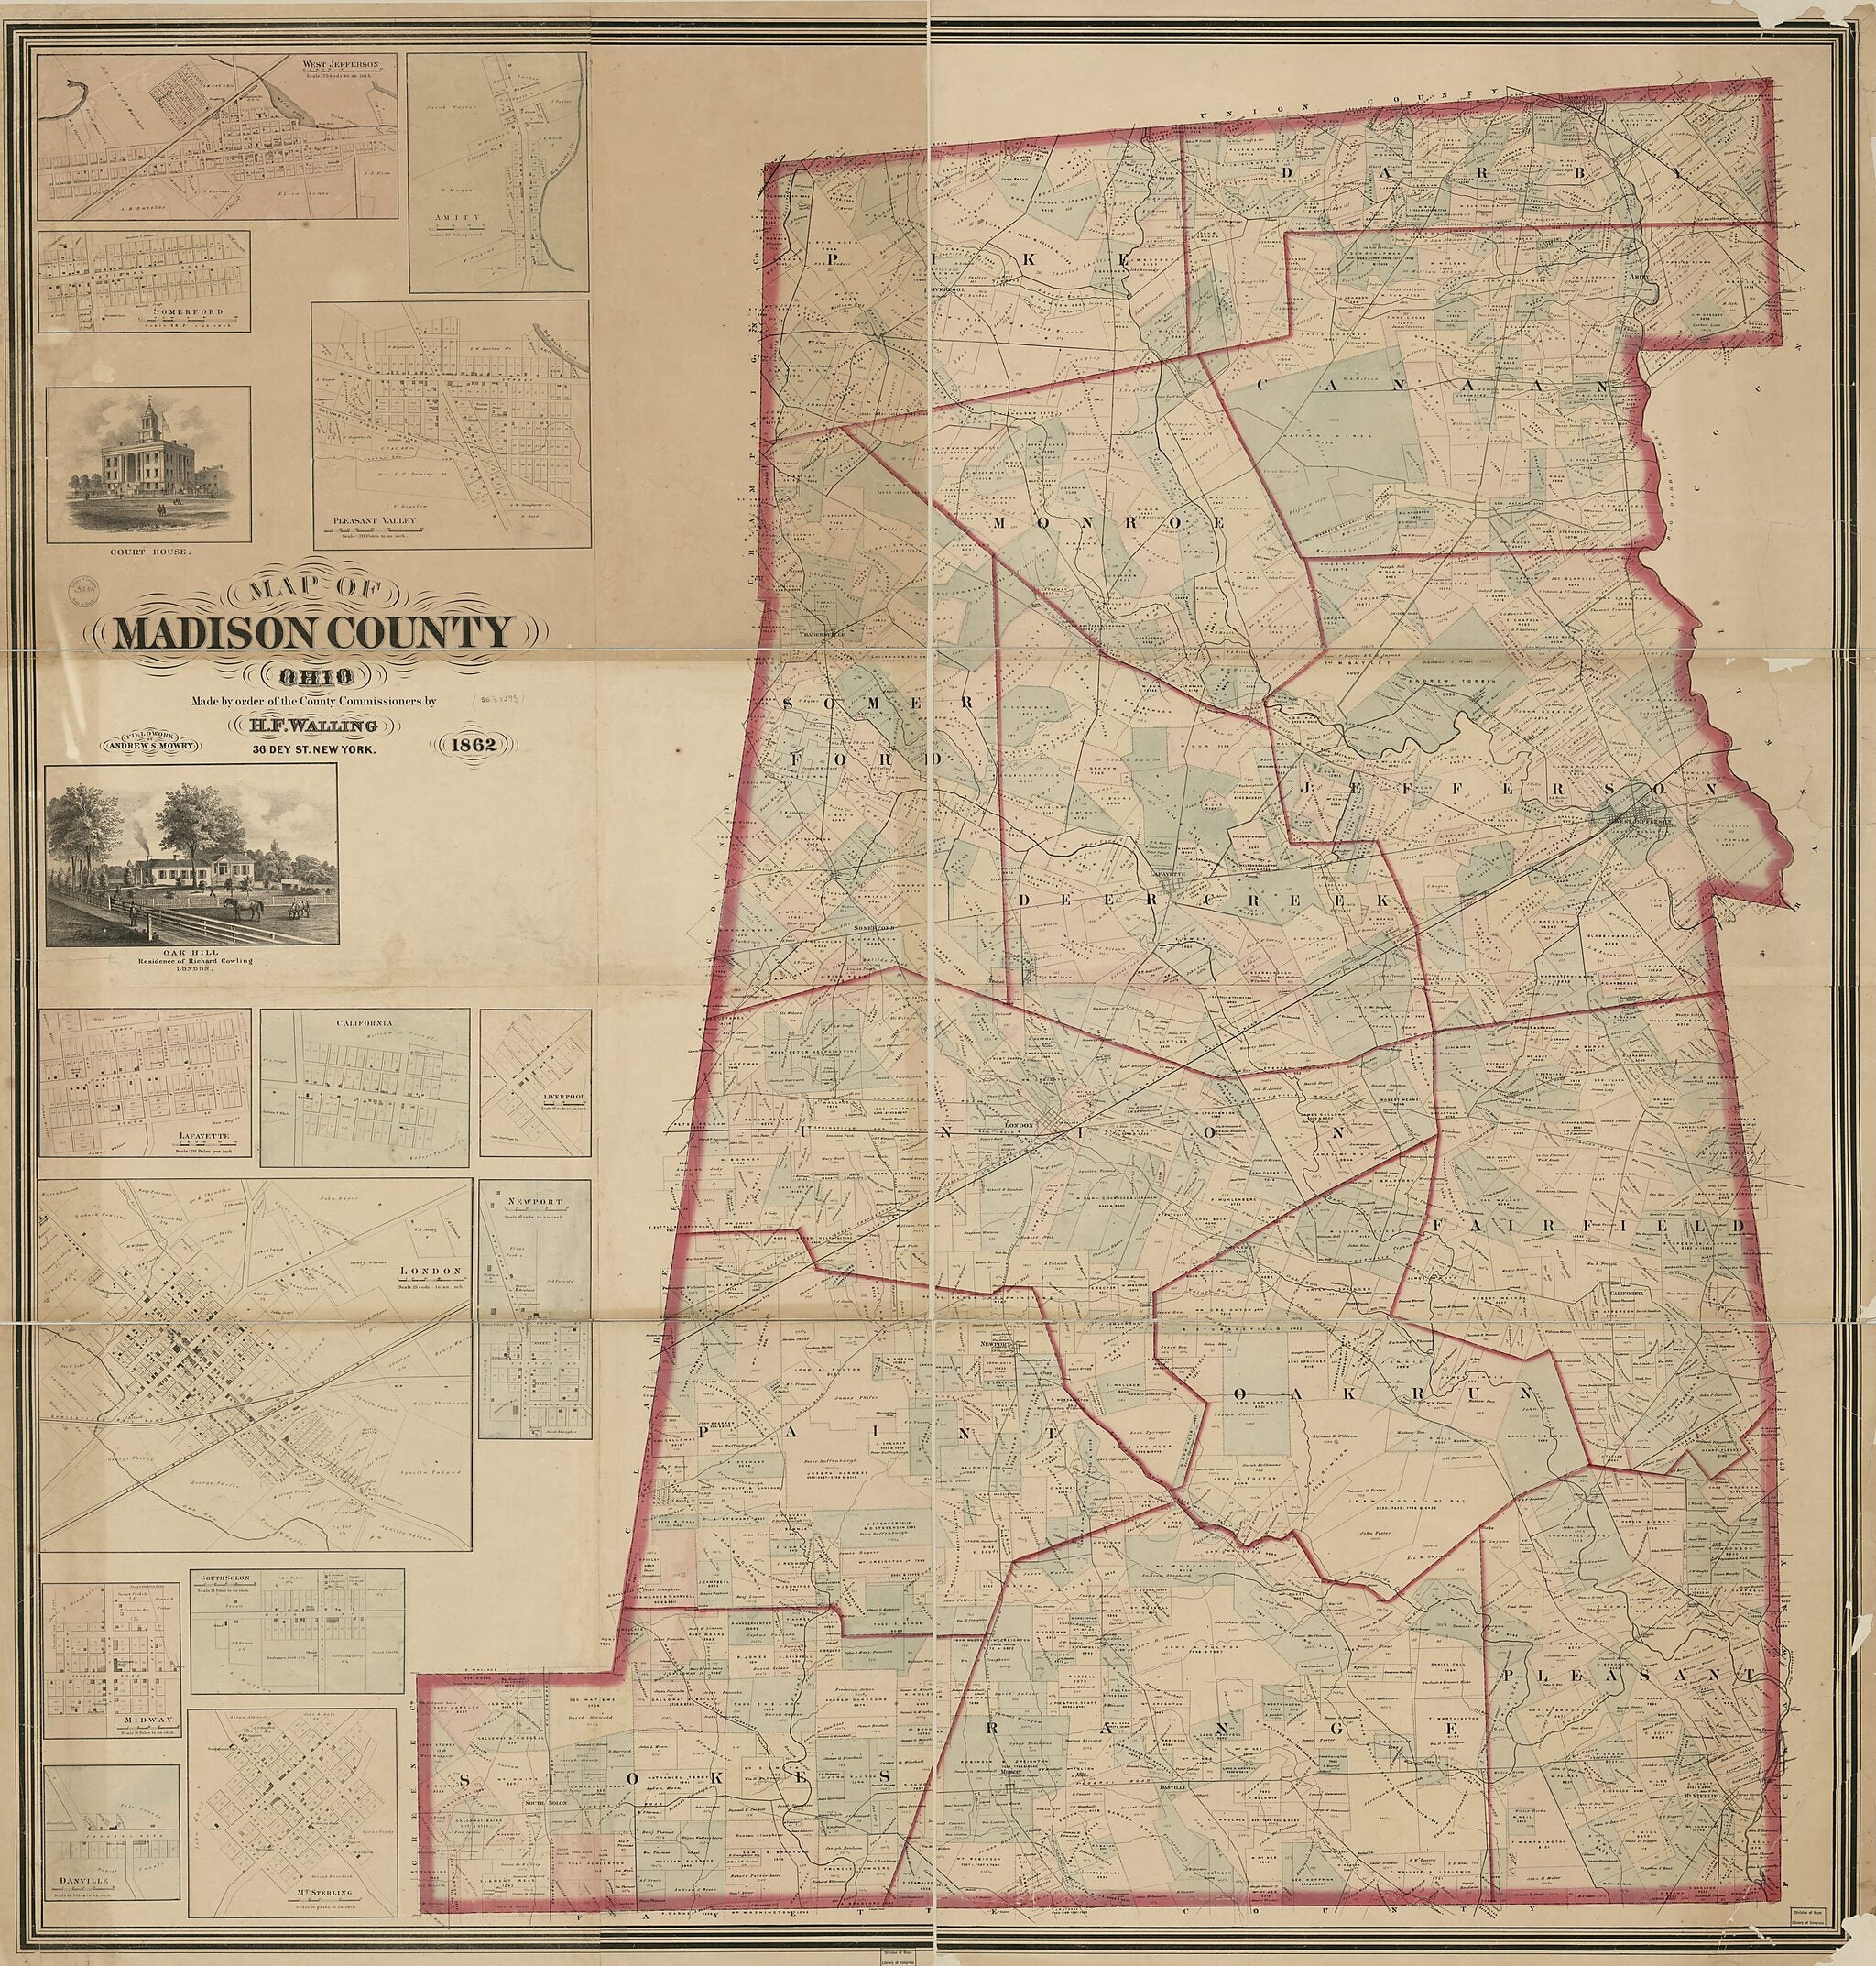 This old map of Map of Madison County, Ohio from 1862 was created by Andrew S. Mowry, Henry Francis Walling in 1862